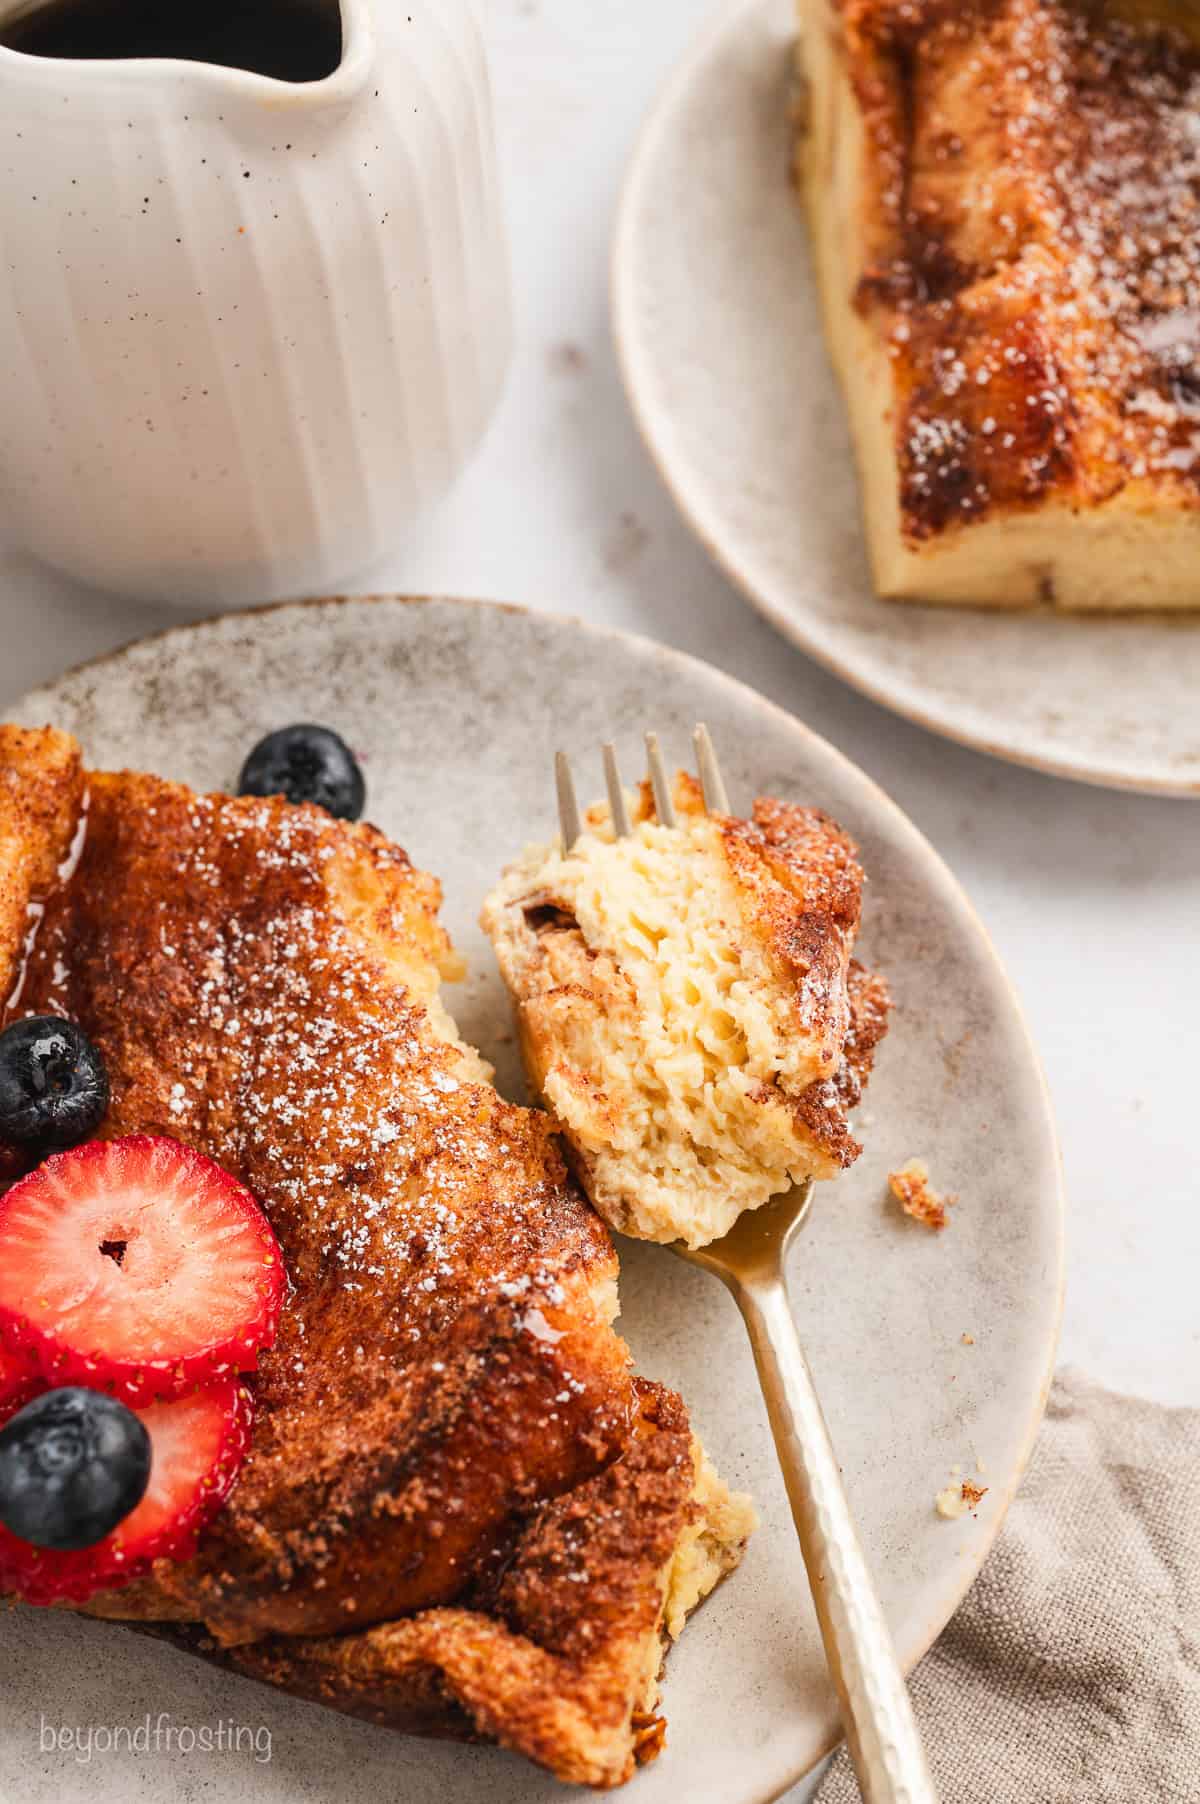 Overhead view of a forkful of French toast casserole next to a slice of French toast topped with berries on a plate, and a jug of maple syrup nearby.